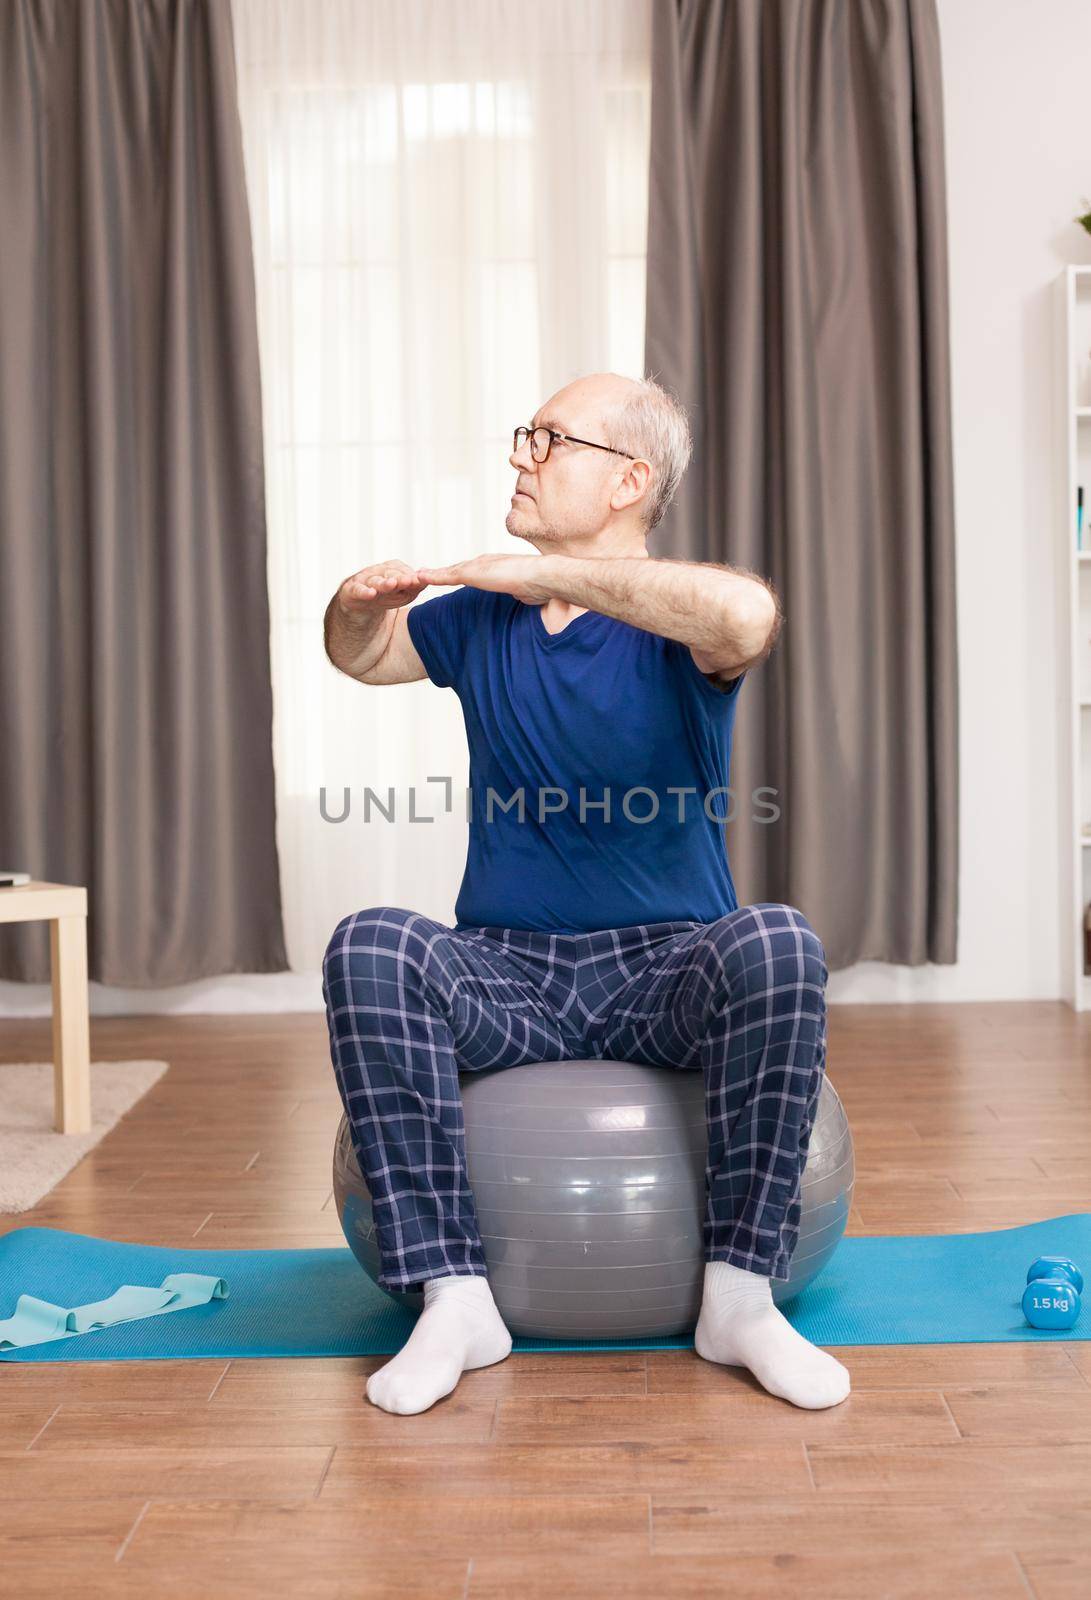 Grandfather training on swiss ball in living room. Old person pensioner online internet exercise training at home sport activity with dumbbell, resistance band, swiss ball at elderly retirement age.